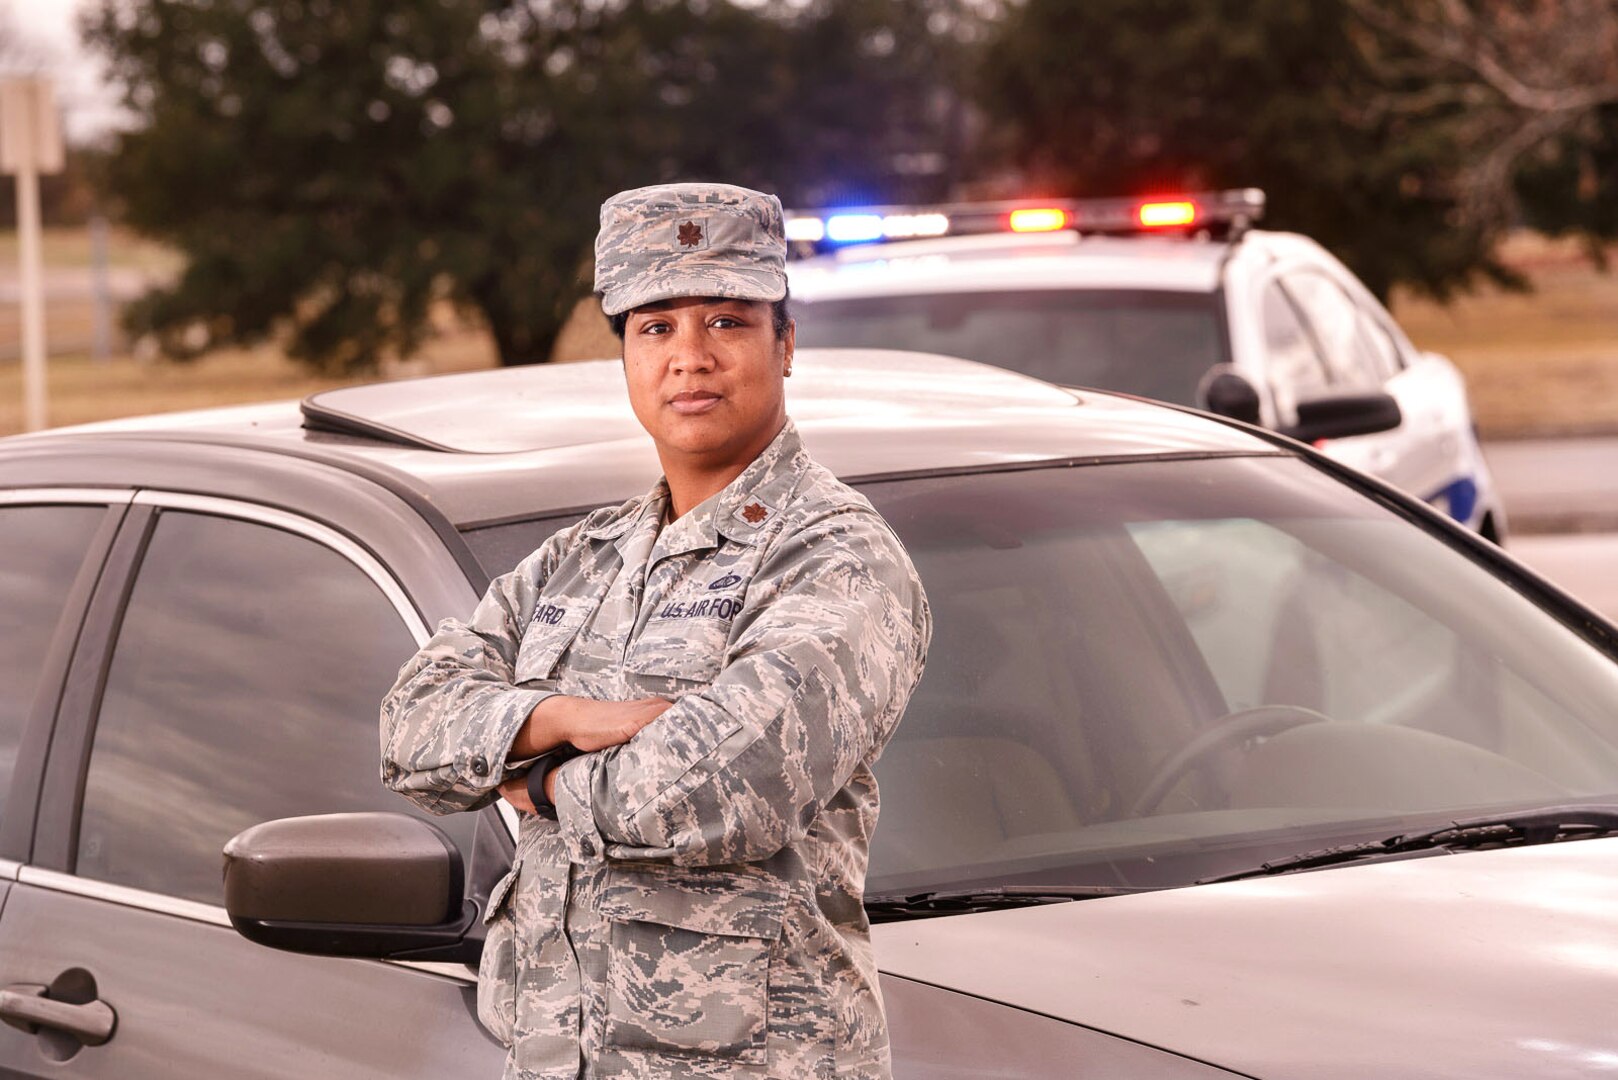 When an Airman failed to report for work on Dec. 6, his absence was immediately noticed. His supervisor, Maj. Octavia Heard, said she knew immediately something was wrong. 